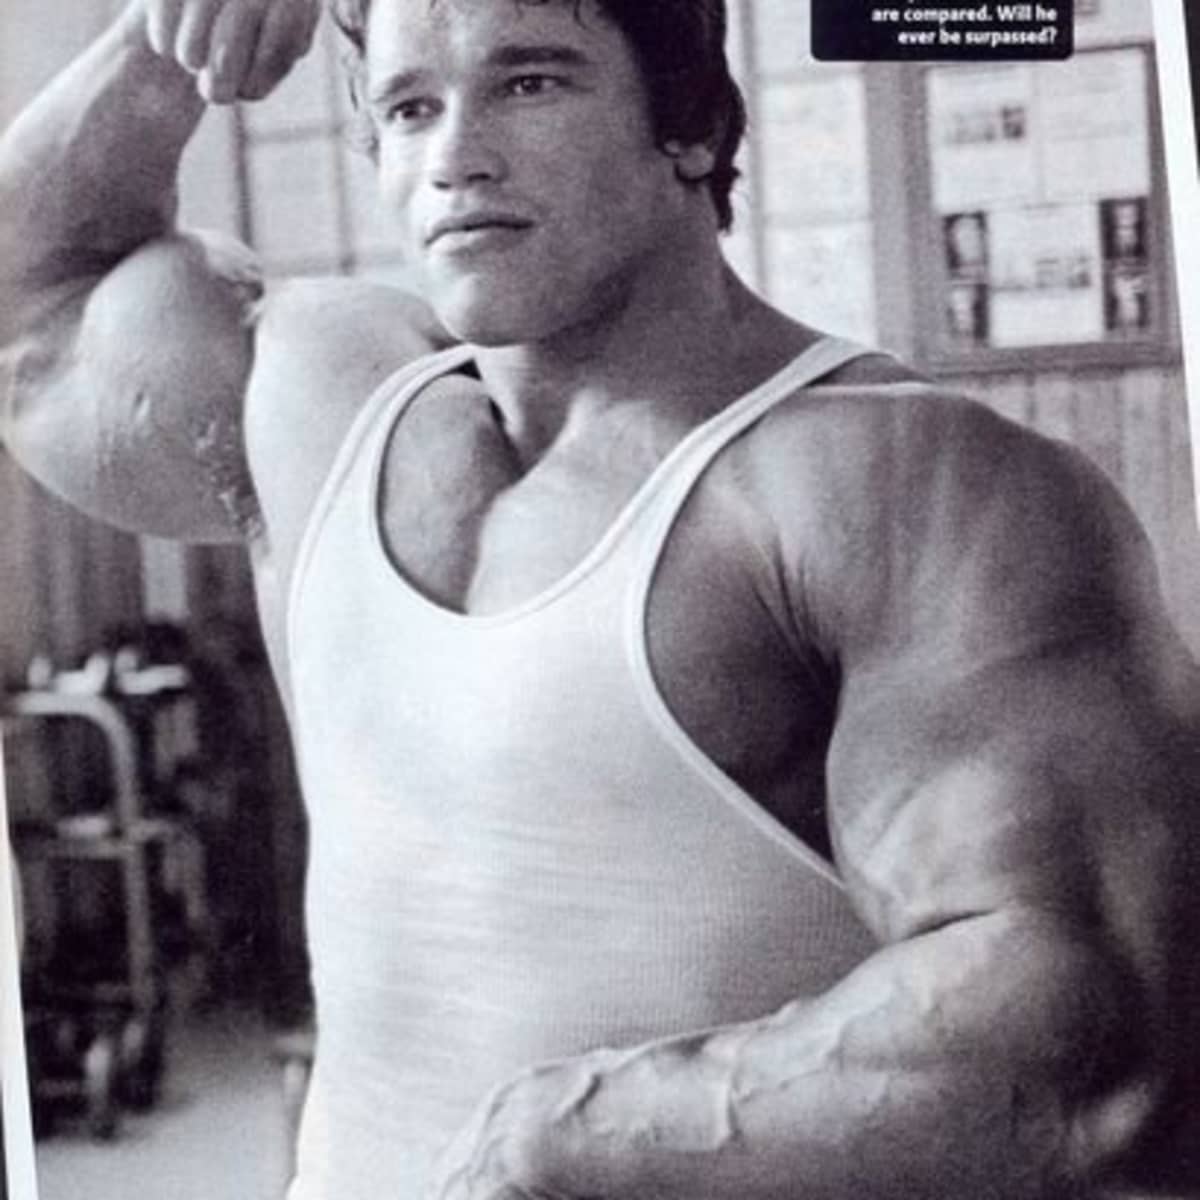 Arnold Schwarzenegger's Diet, Exercise Tips to Build Muscle